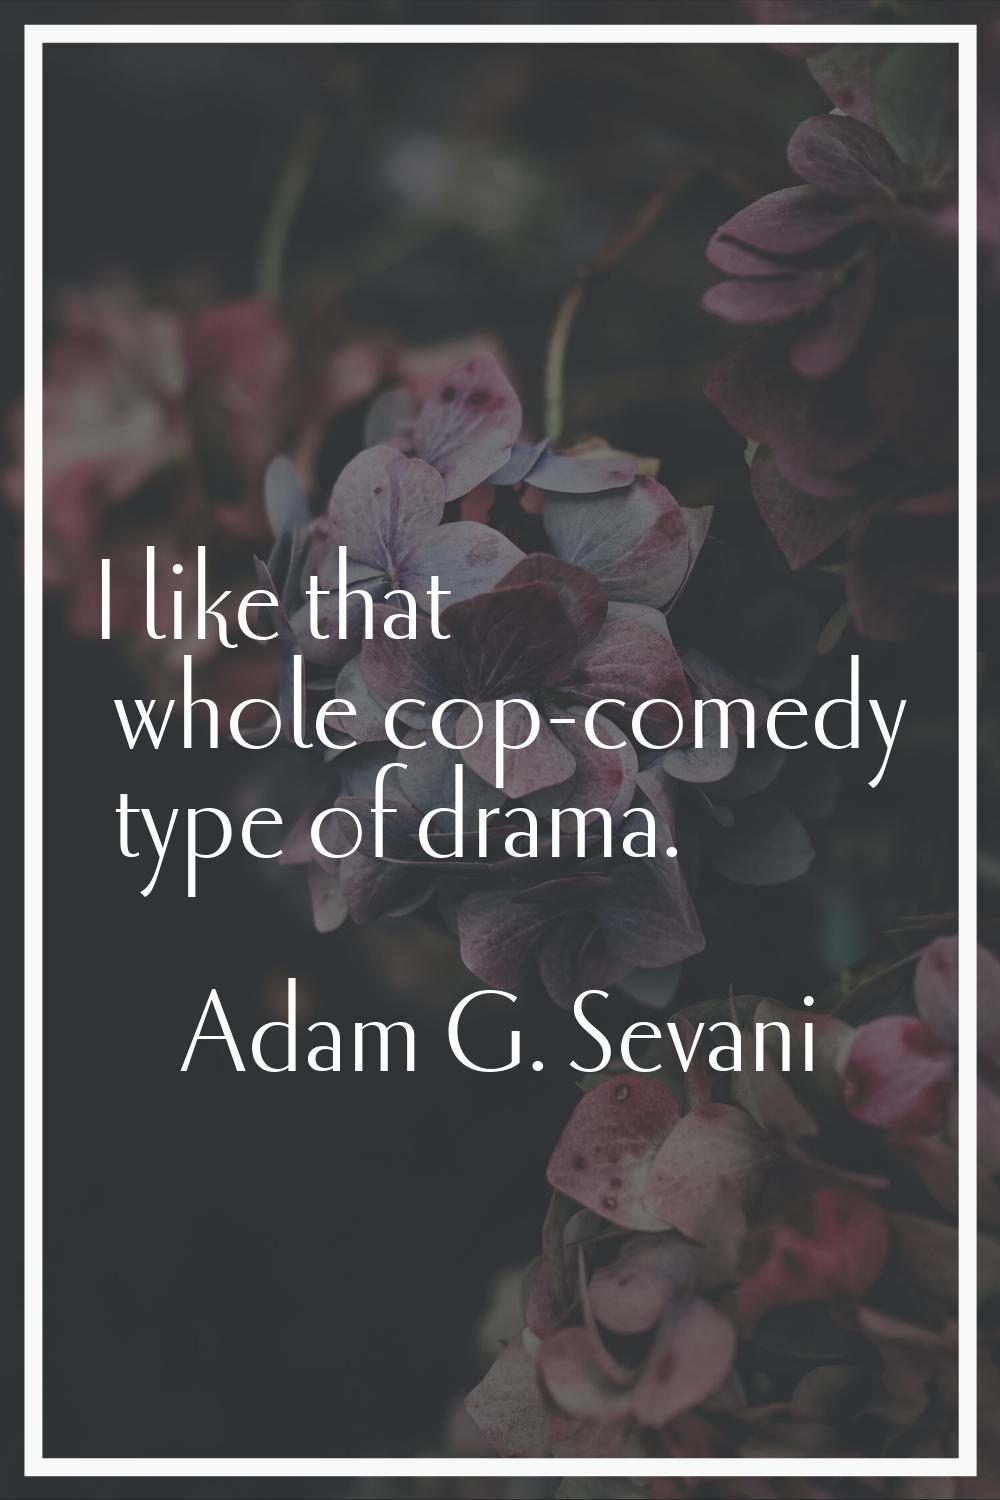 I like that whole cop-comedy type of drama.